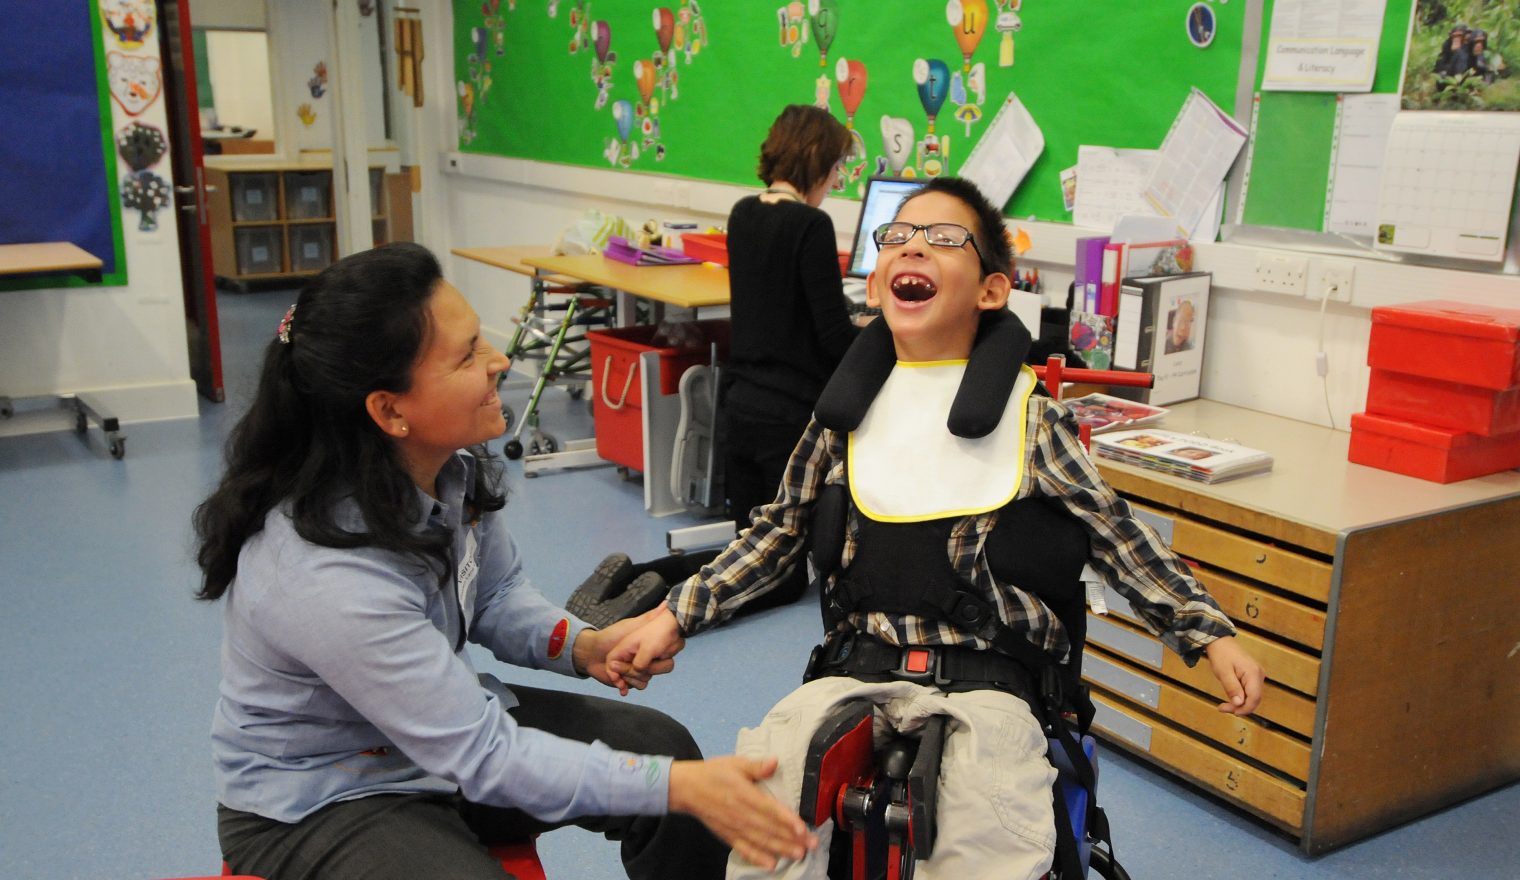 A boy with cerebral palsy smiles in our dynamic seat as his mother looks on smiling